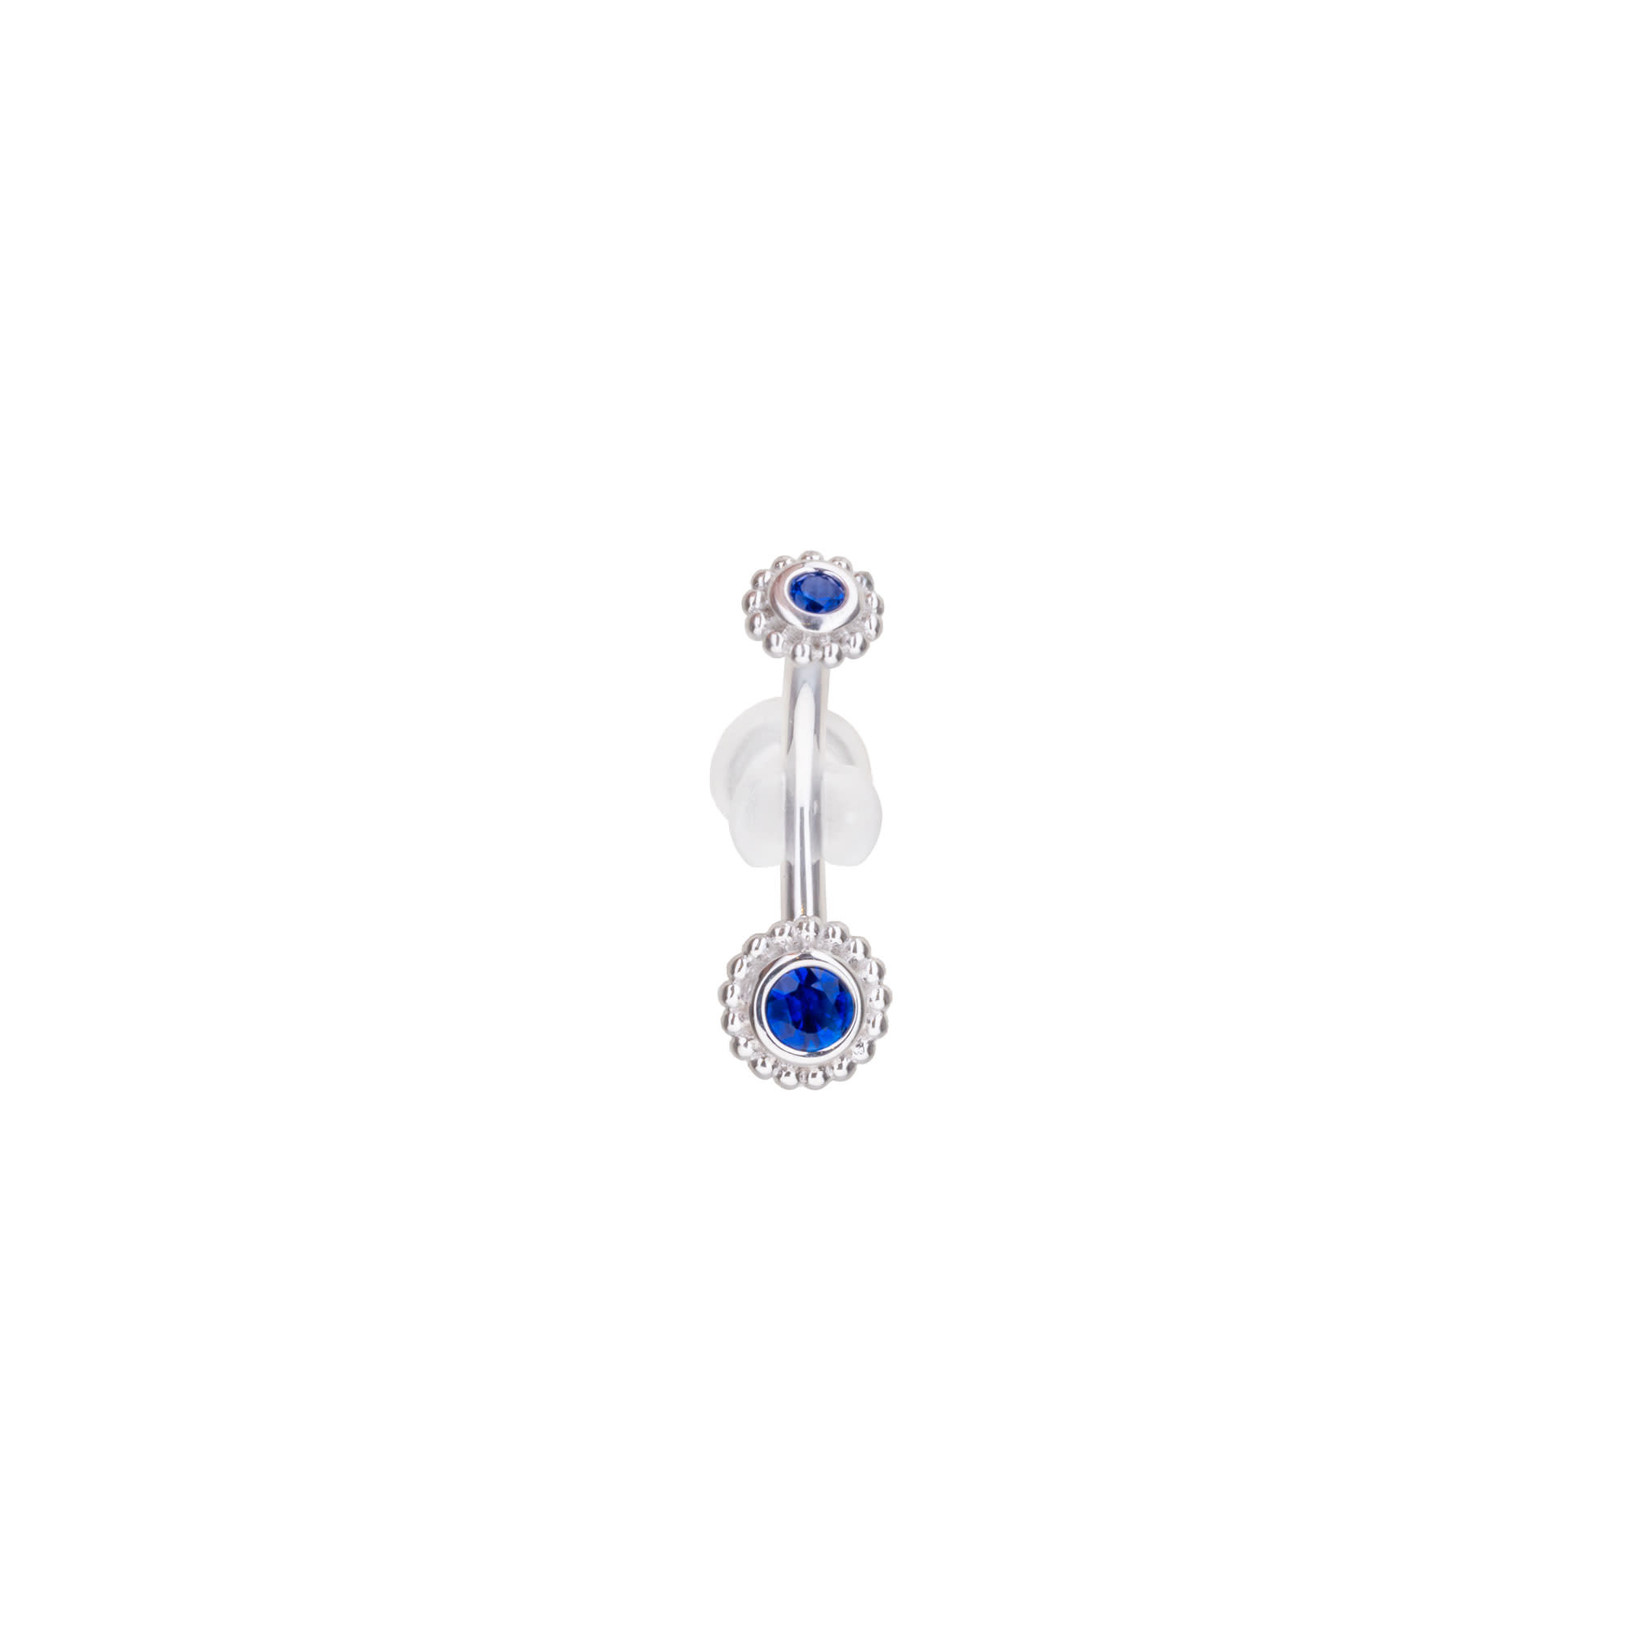 BVLA BVLA 14g 3/8 white gold "Beaded Choctaw" navel curve with 2.0 & 3.0 AA sapphire